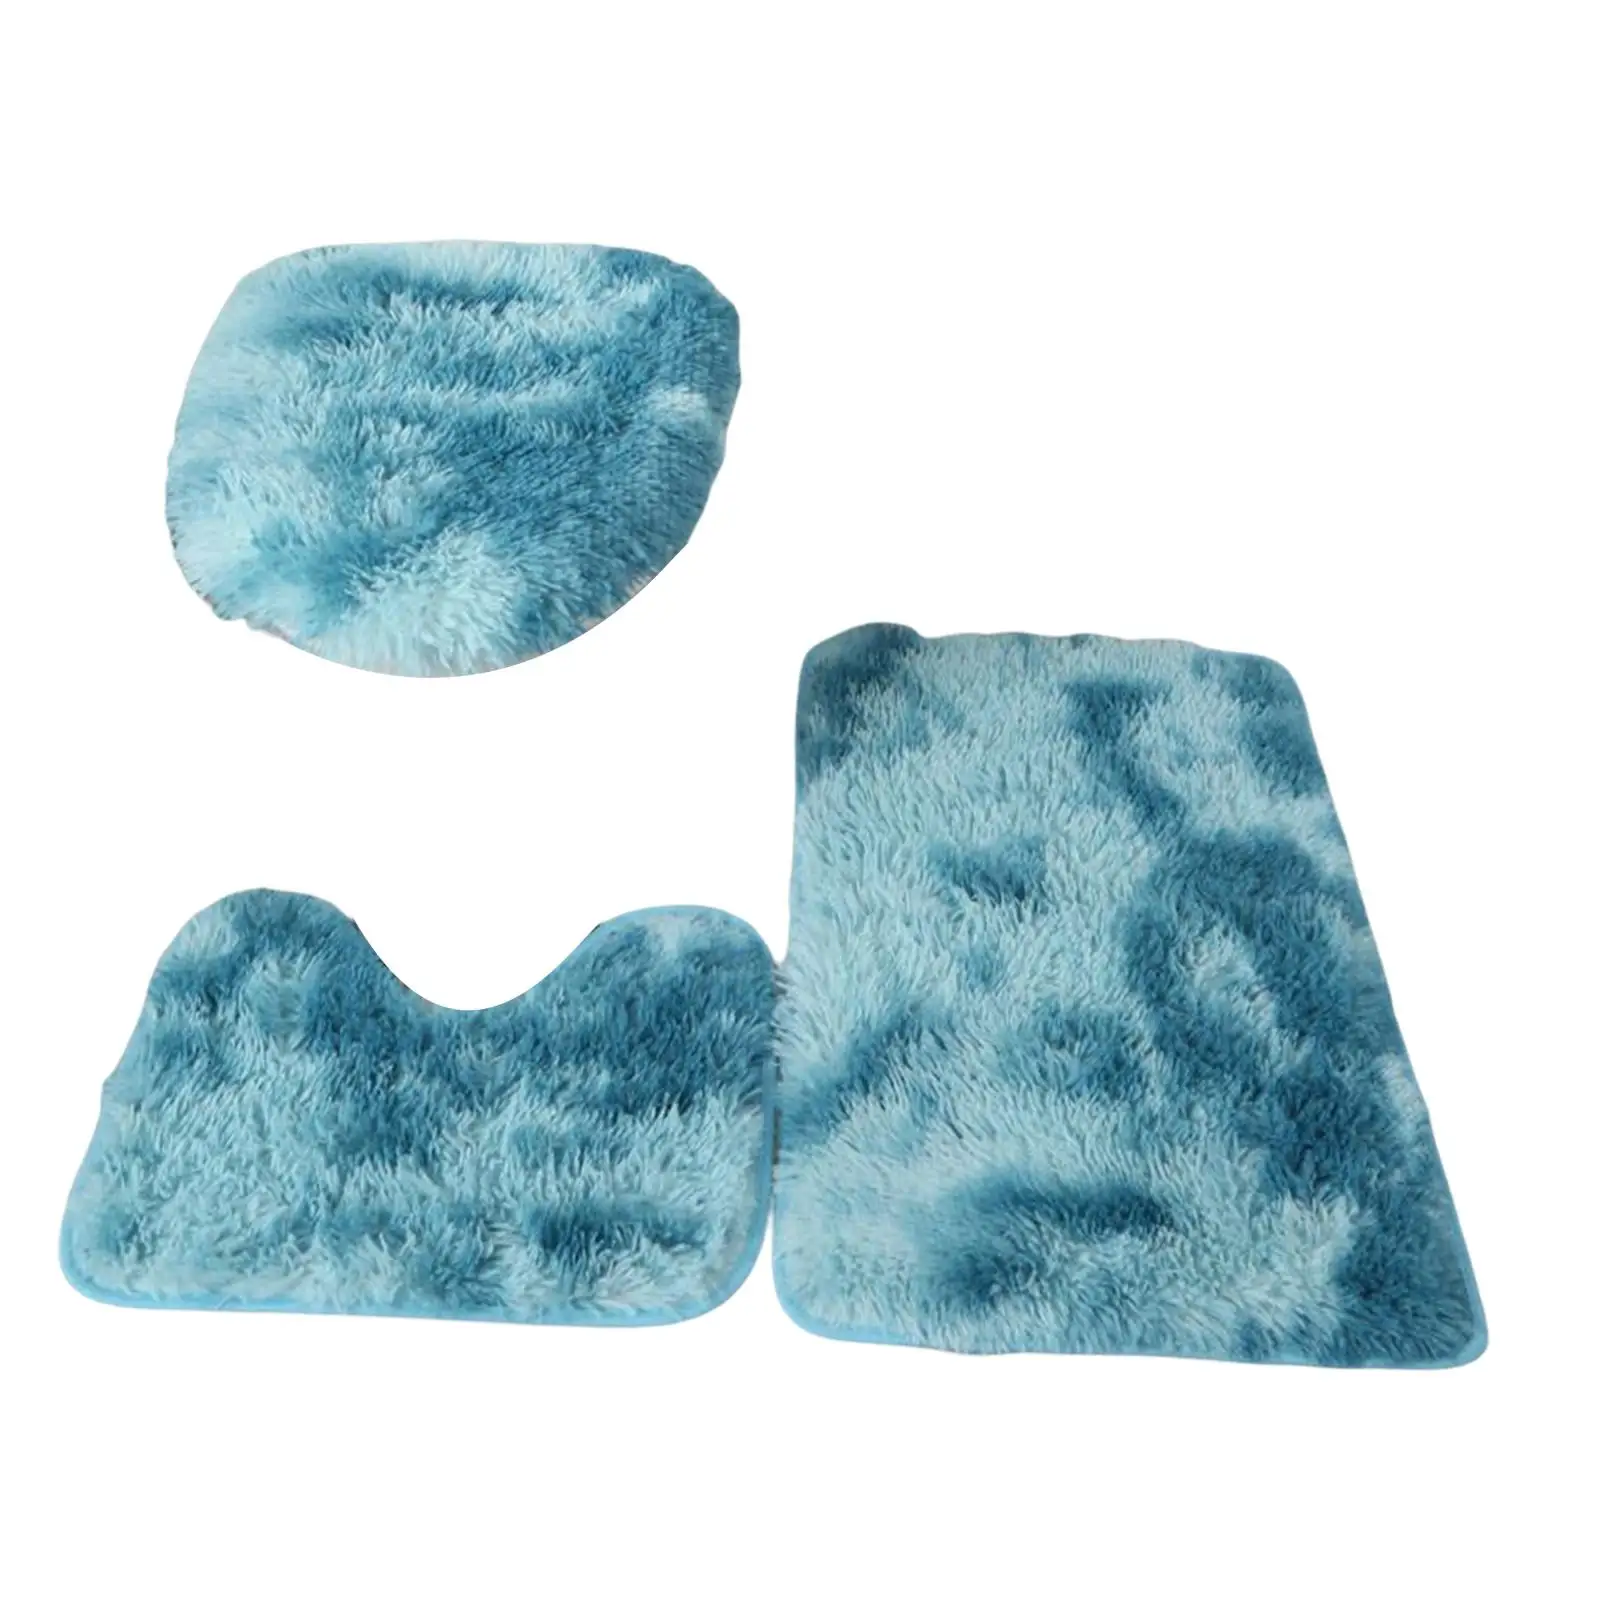 3x Bath Mats Set for Bathroom with Toilet Lid Cover Absorbent Suit Absorbent Three Piece Toilet Set for Shower Bathroom Floors